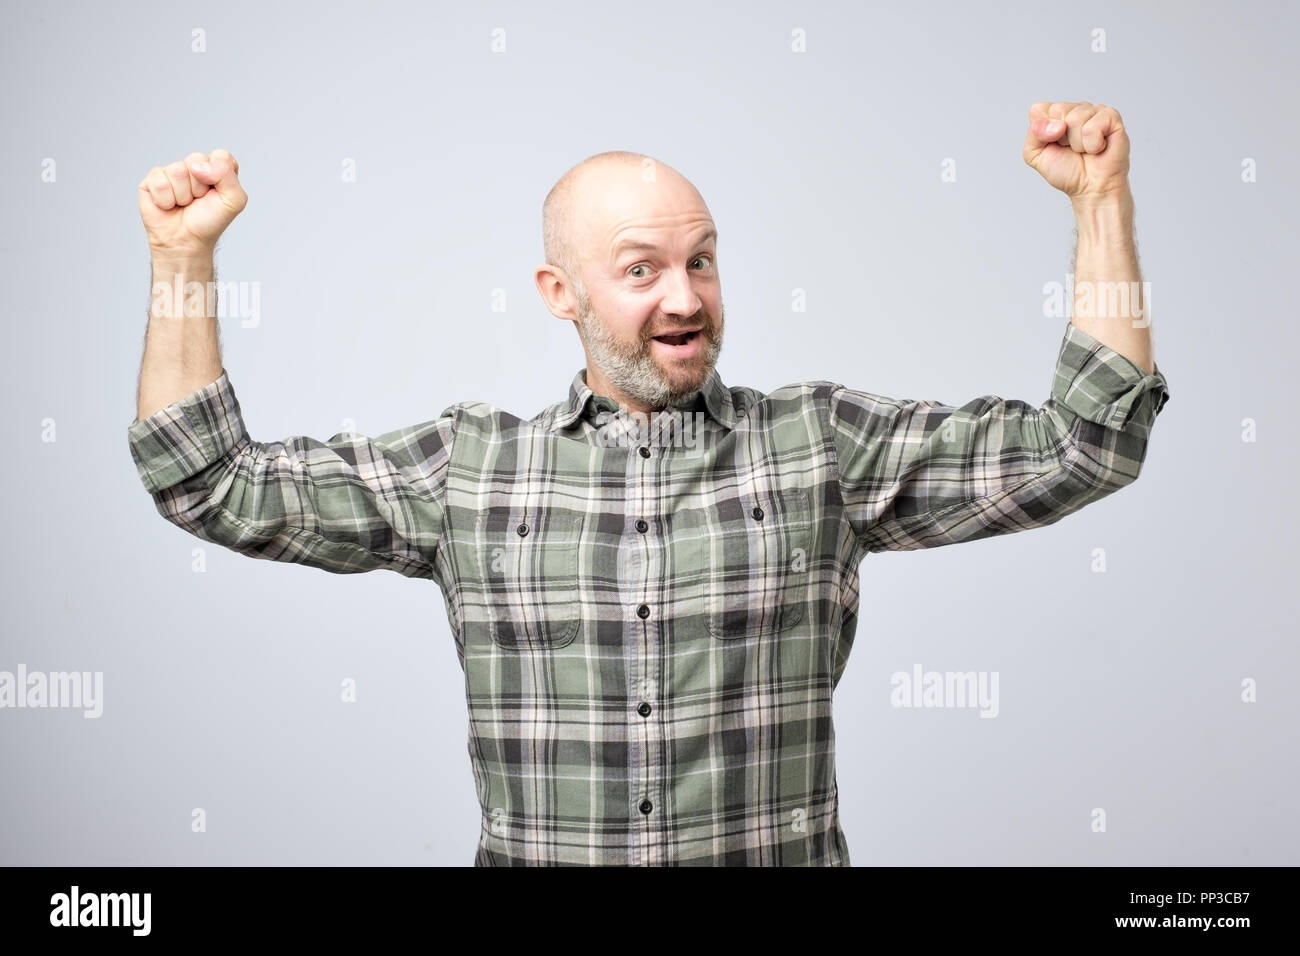 Positive emotional man smiles, shows muscles on his arms, feels proud to be strong. Stock Photo